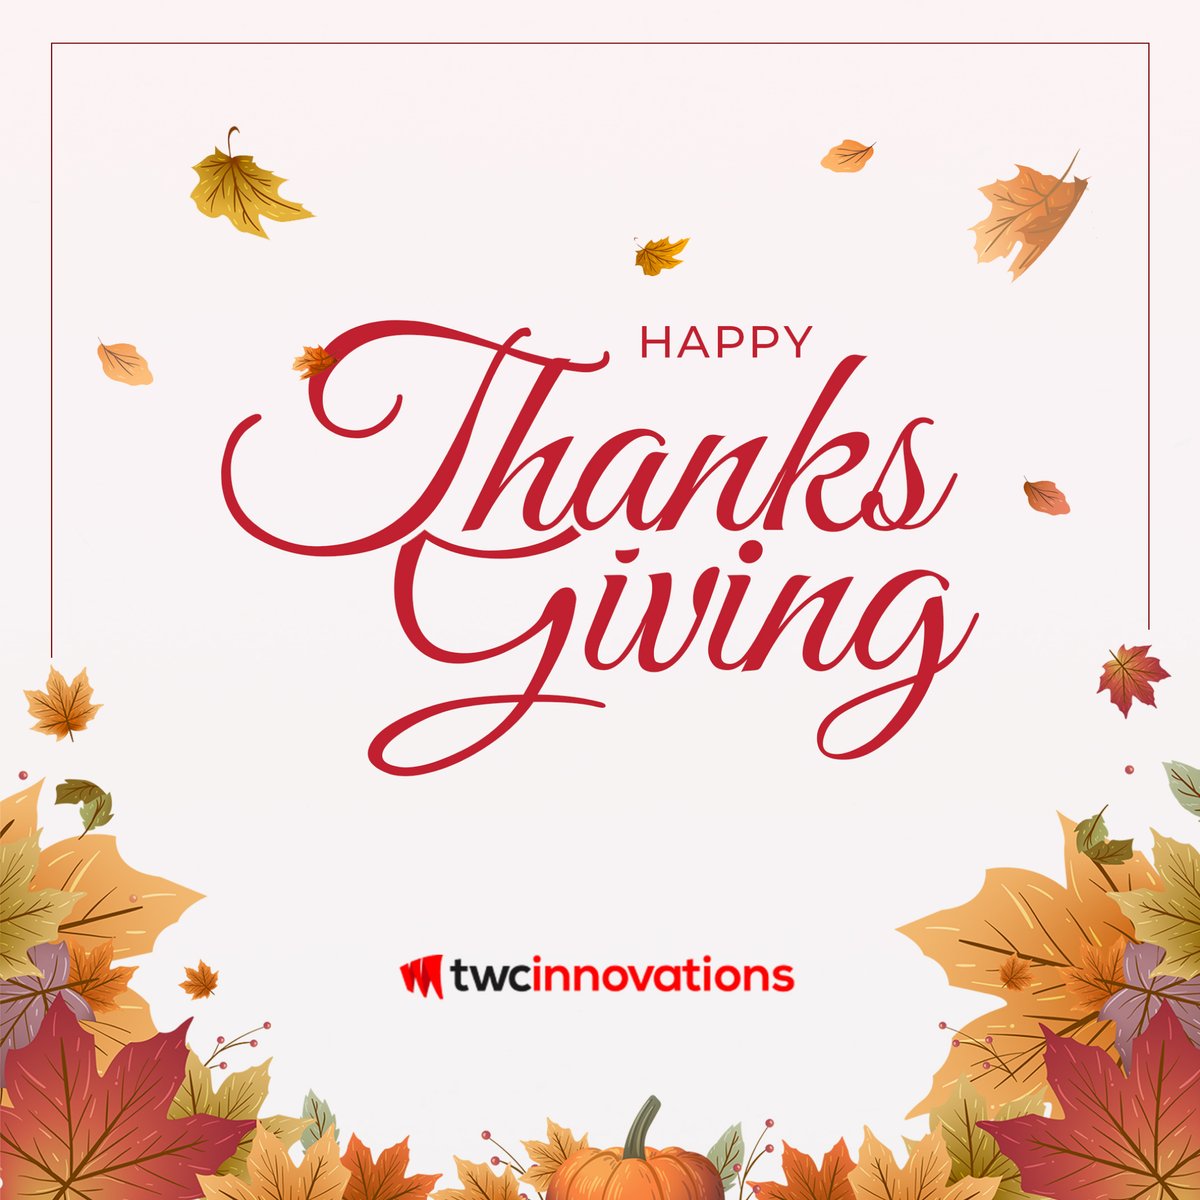 This Thanksgiving Day and always, we are thankful for our employees, customers and friends. You are a part of our family, and we appreciate you!
・・・
 #TWCInnovation #givingthanks #Thanksgiving2022